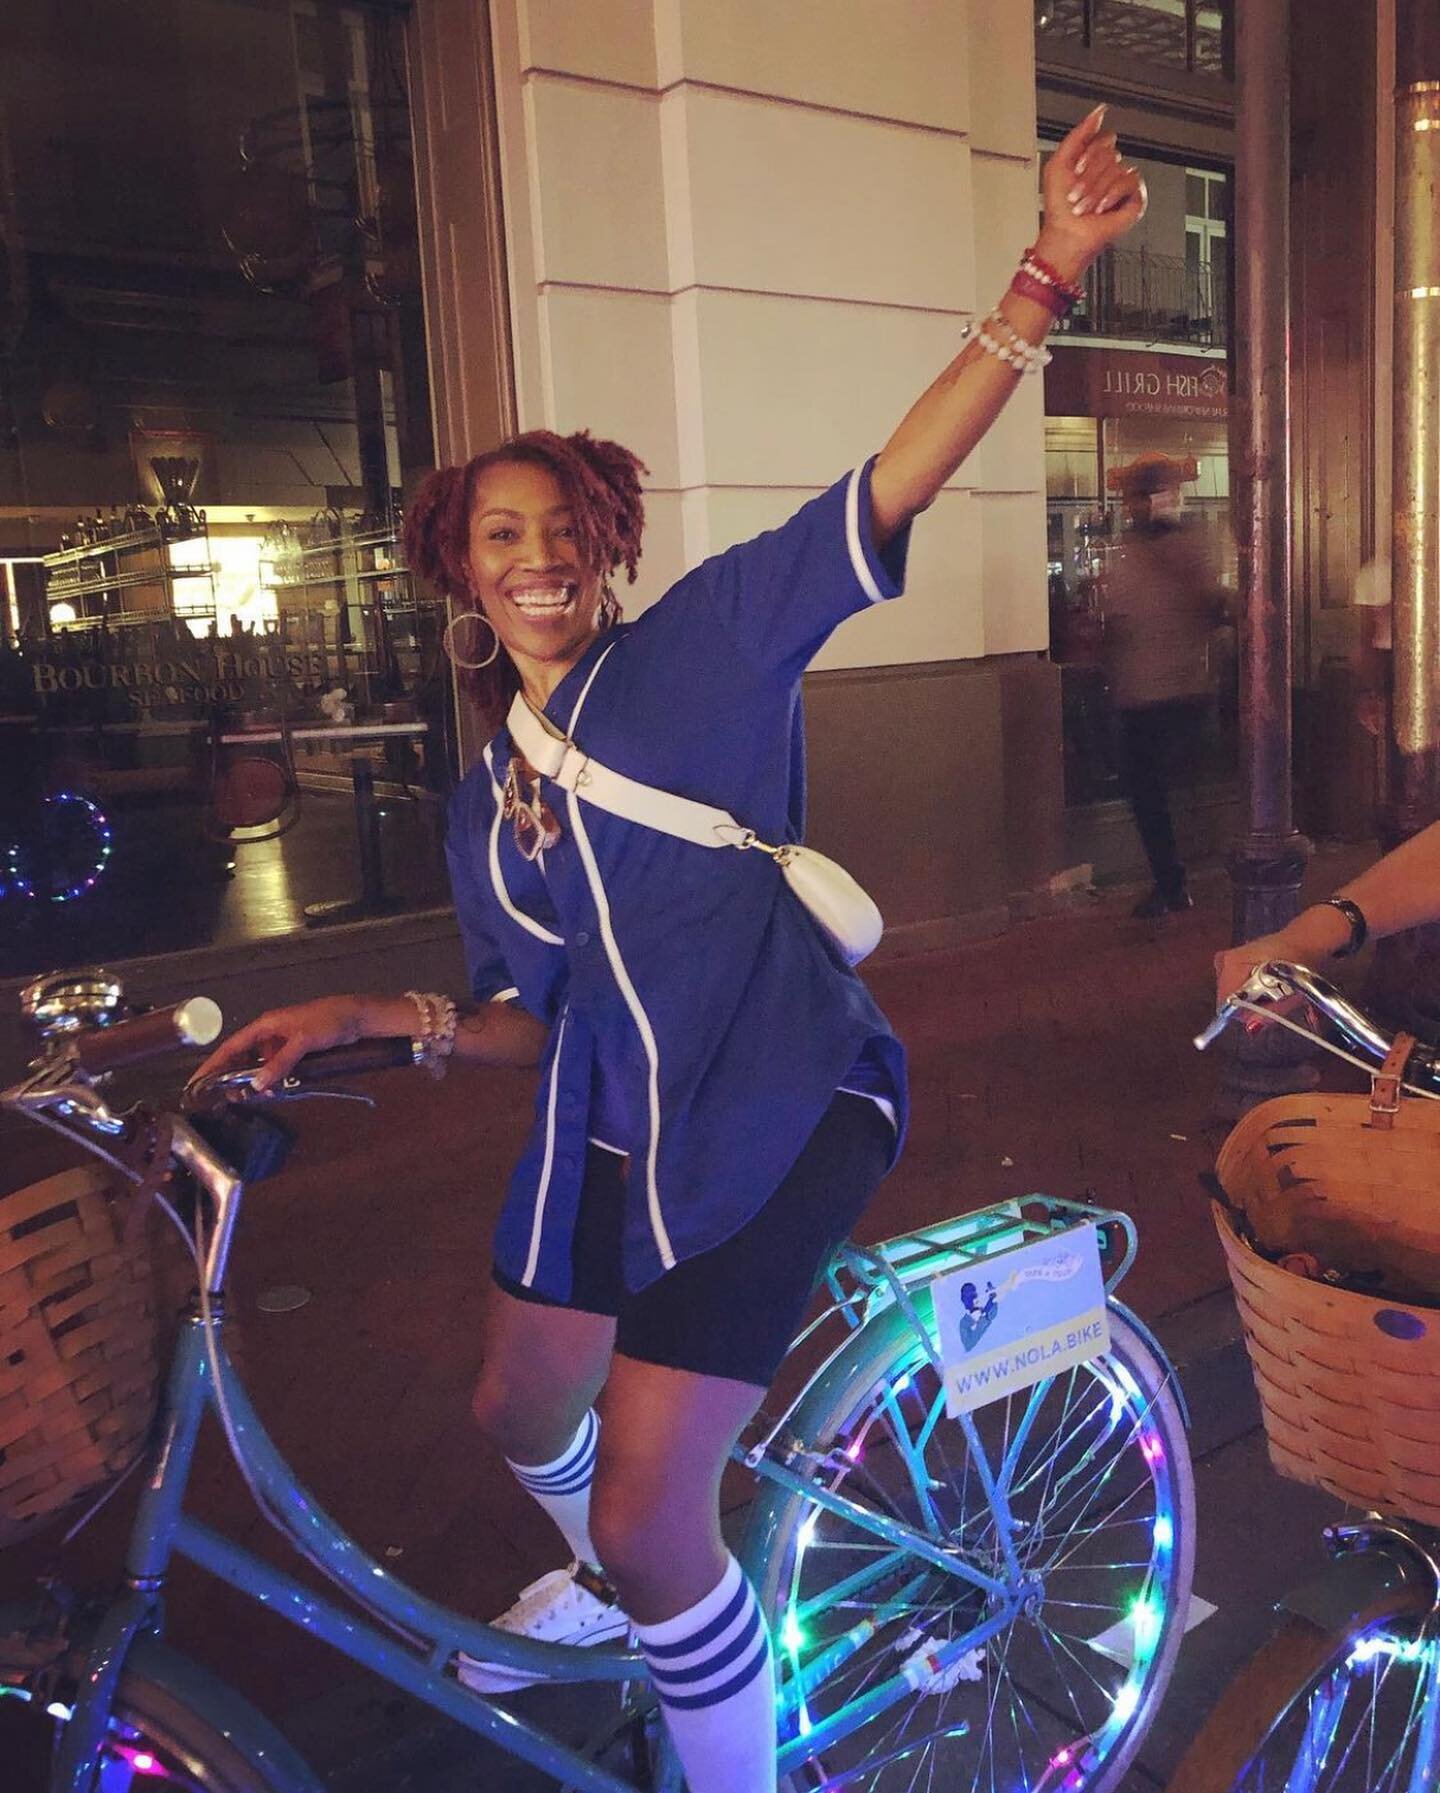 @iamwhyfitness it was such a pleasure to have your party with us on our night ride! Glad we could be a part of the Birthday weekend! #neworleans #nola #souldofnola #datbikelife #bicycle #nightliferide #publicbikes